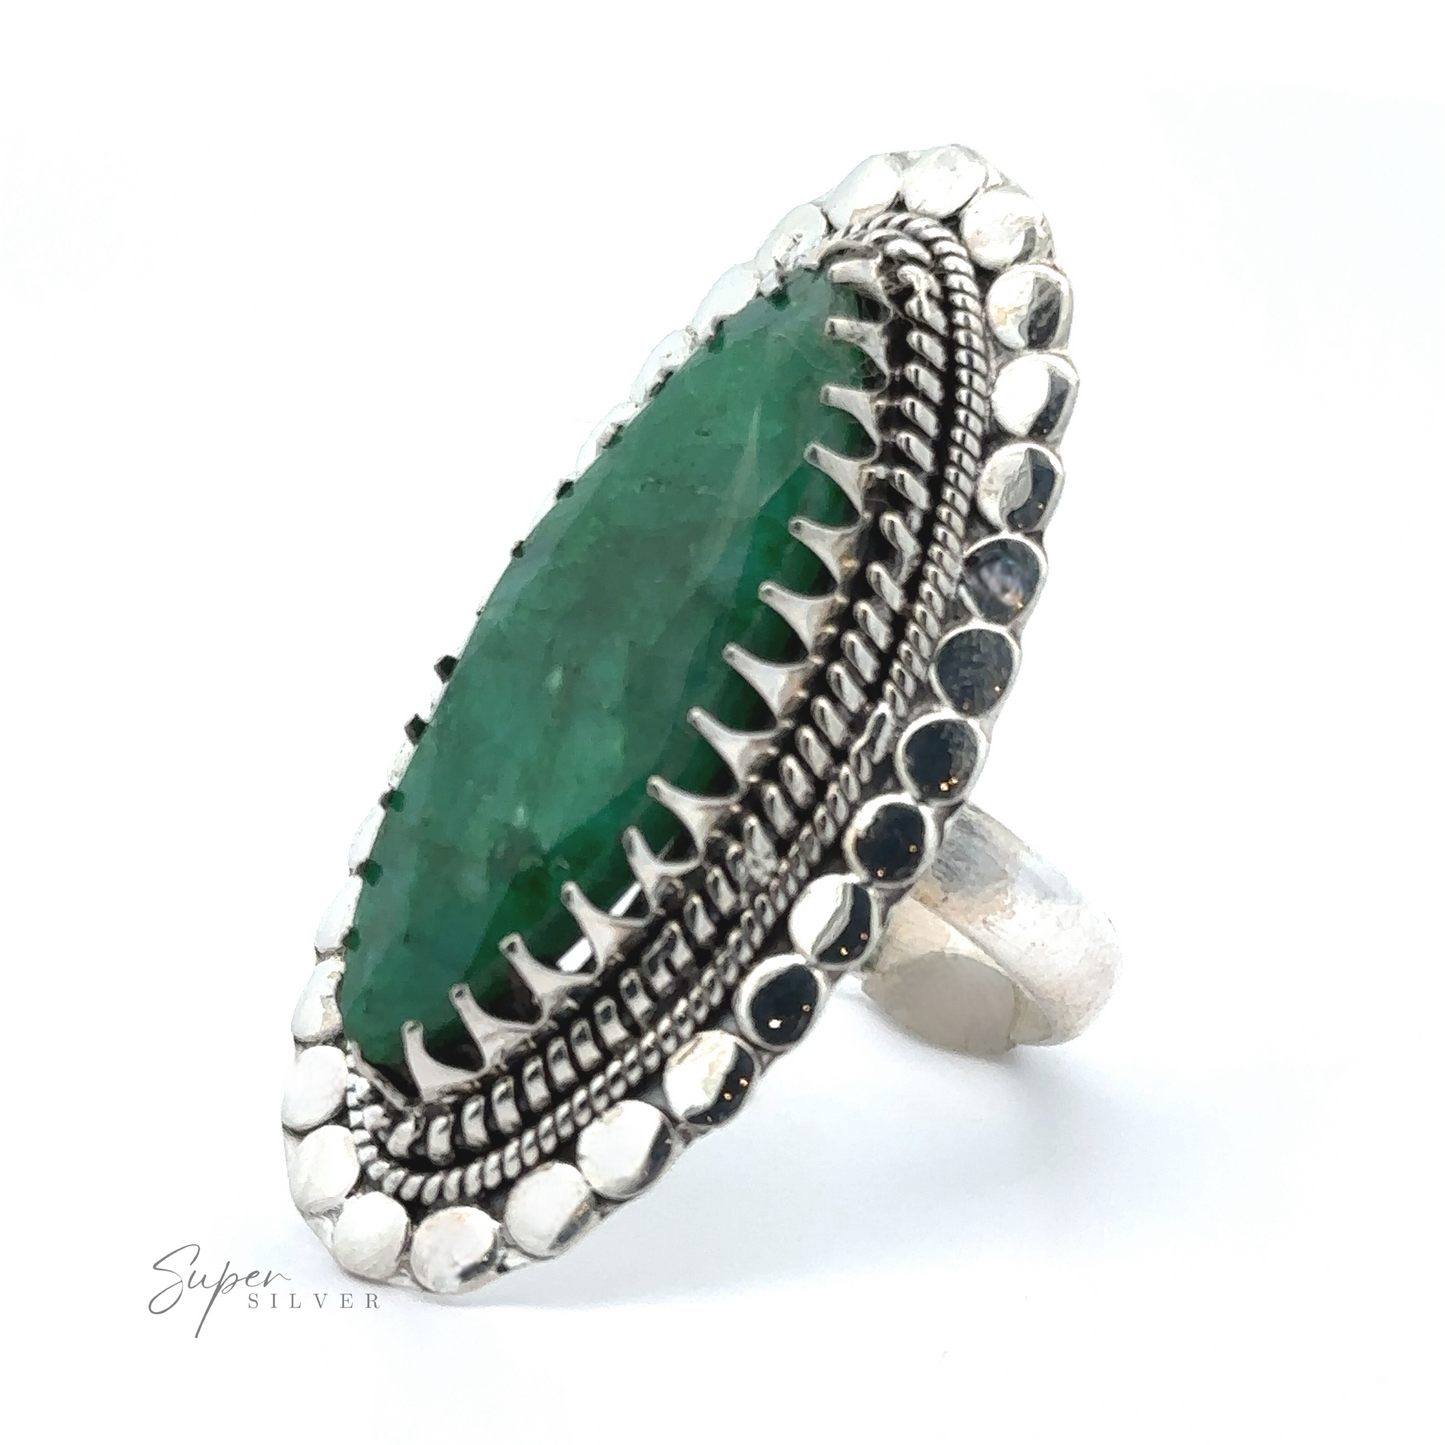 
                  
                    A striking Statement Marquise Shaped Gemstone Ring with an oval-shaped green stone surrounded by intricate metalwork and a textured band, epitomizing bohemian jewelry, displayed on a white background.
                  
                